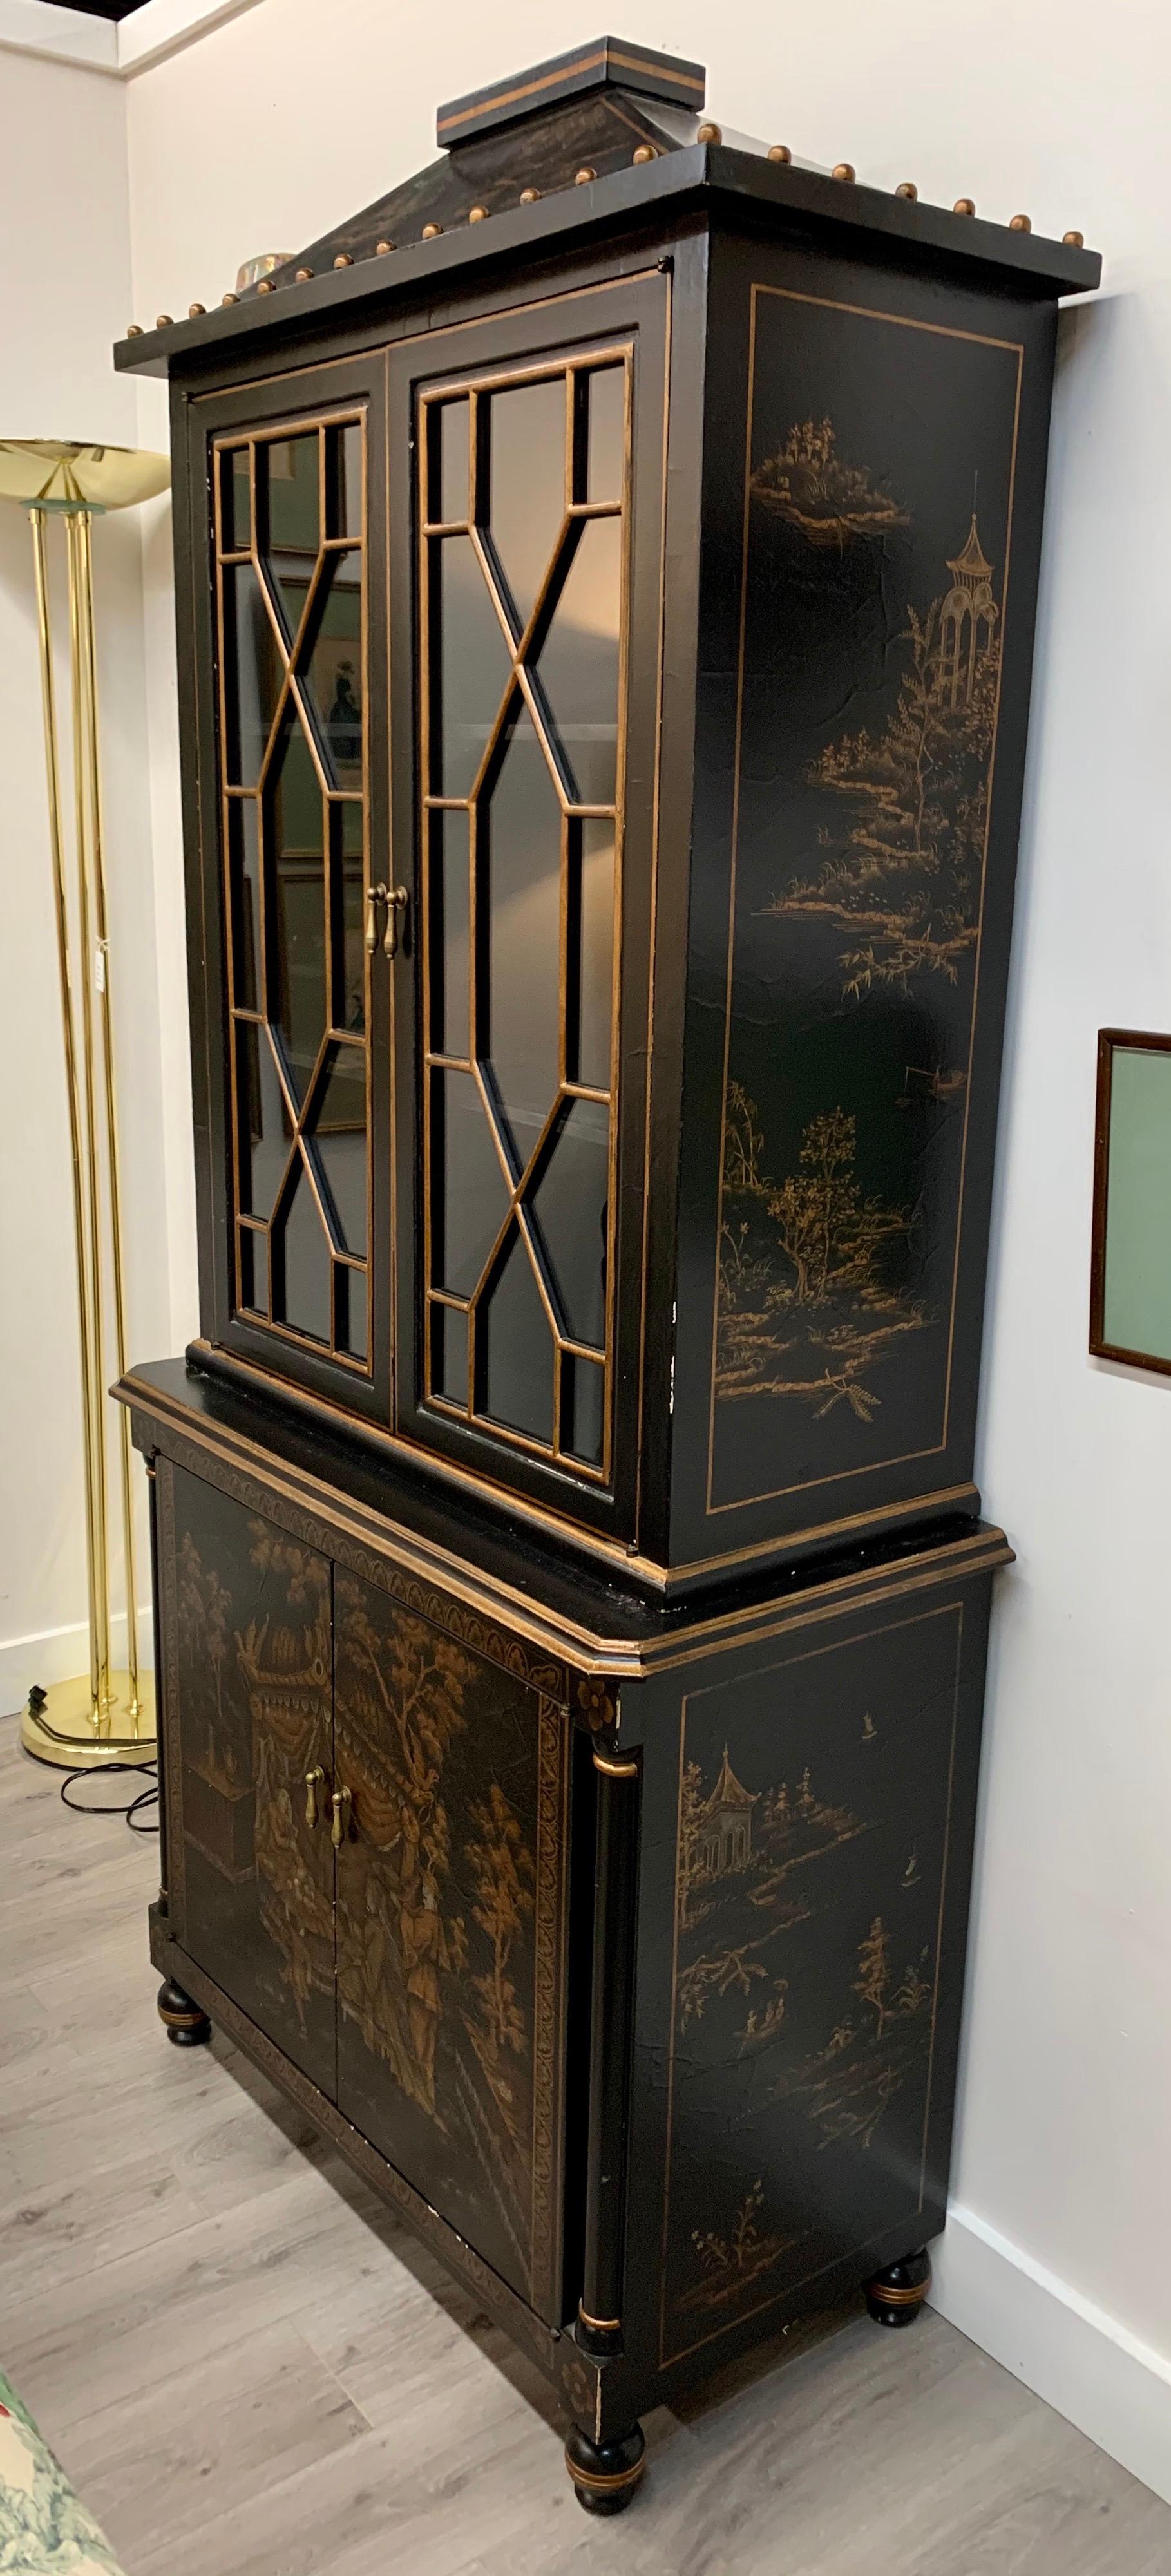 Stunning Chinese Export chinoiserie cabinet with detailed fretwork over glass at top. Features rare
pagoda shaped top. Multiple shelves with plenty of storage. Now, more than ever, home is where the heart is.